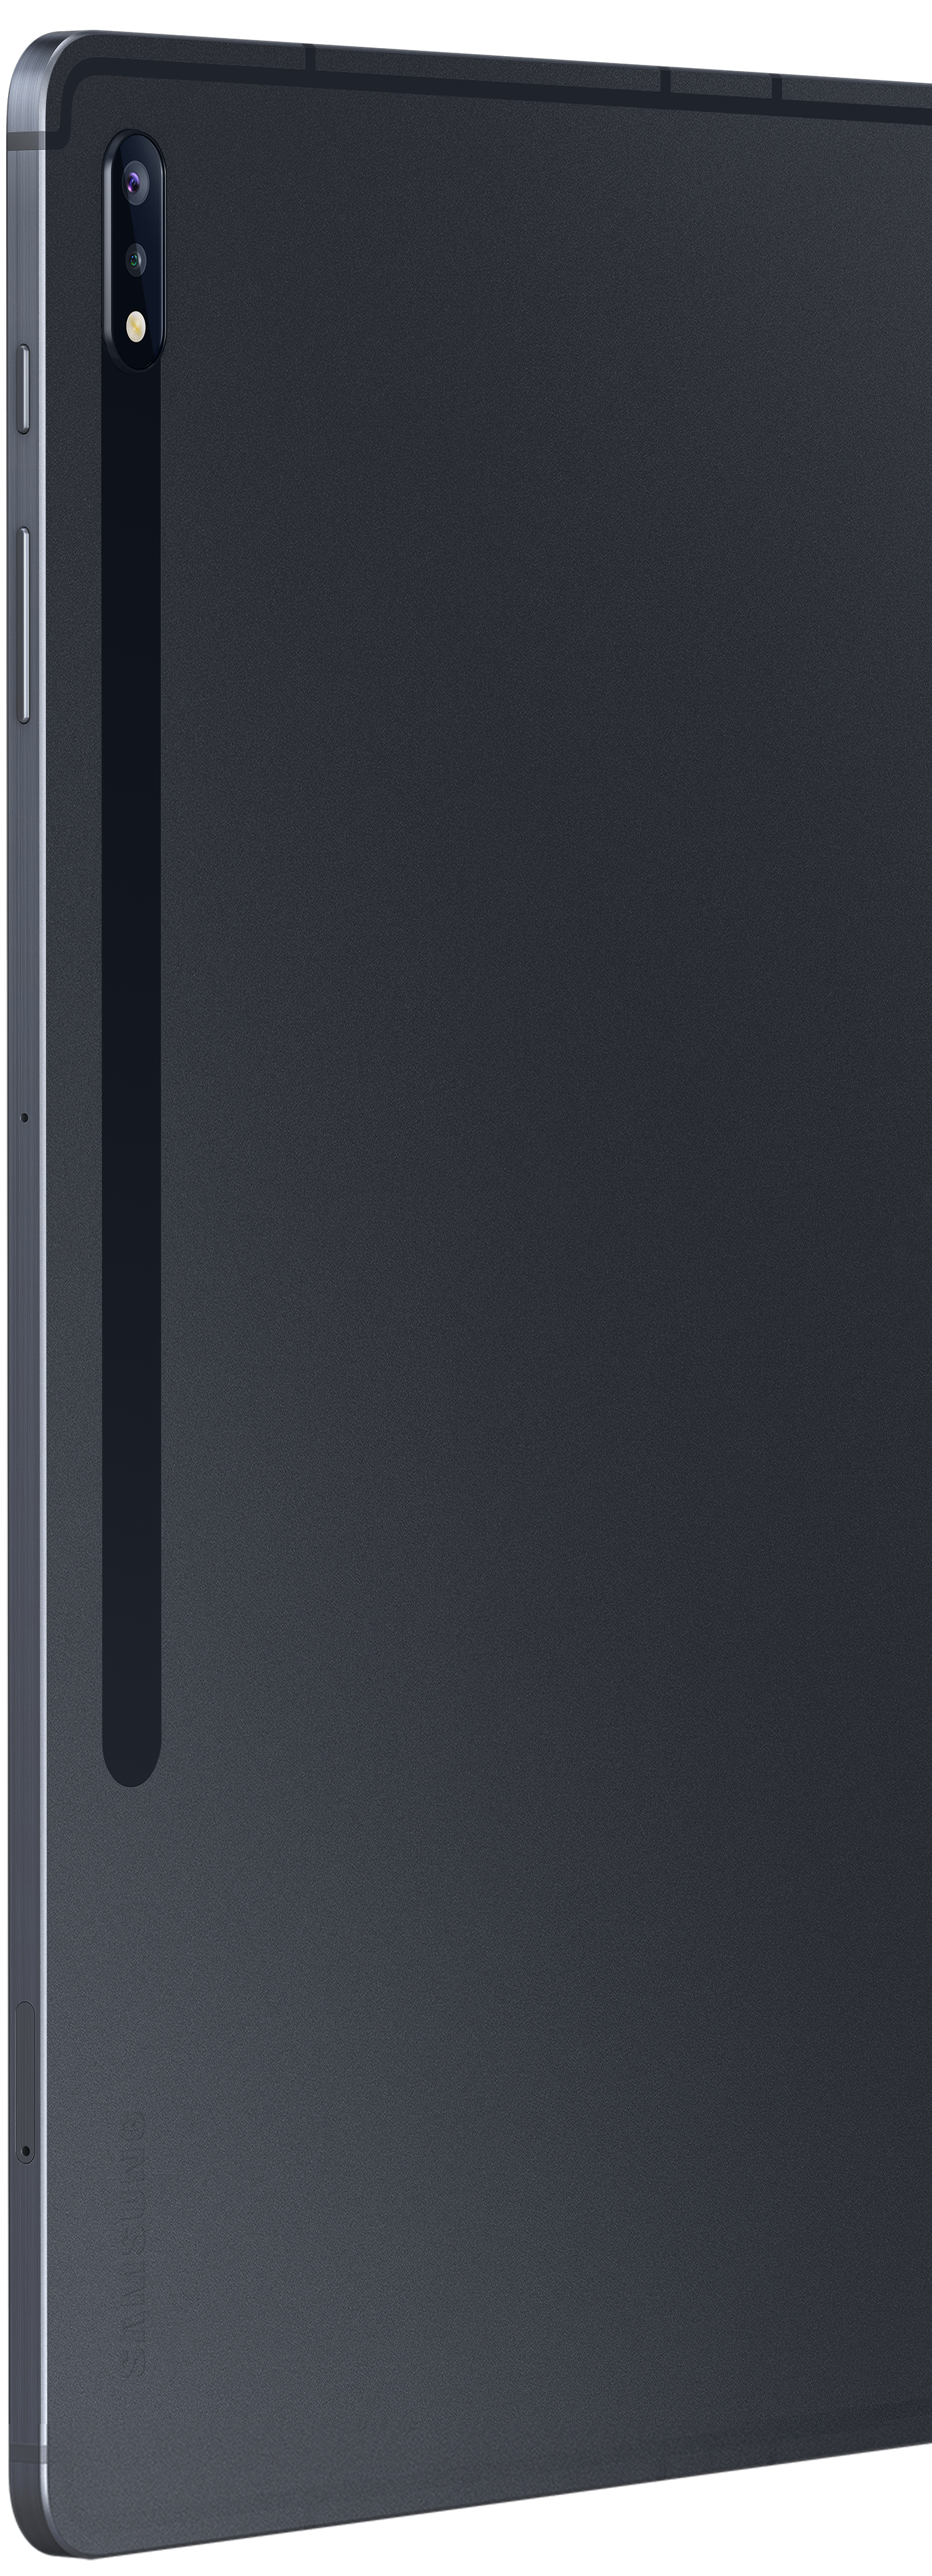 Close-up of Galaxy Tab S7+ in Mystic Black's rear view shows the rear camera placement